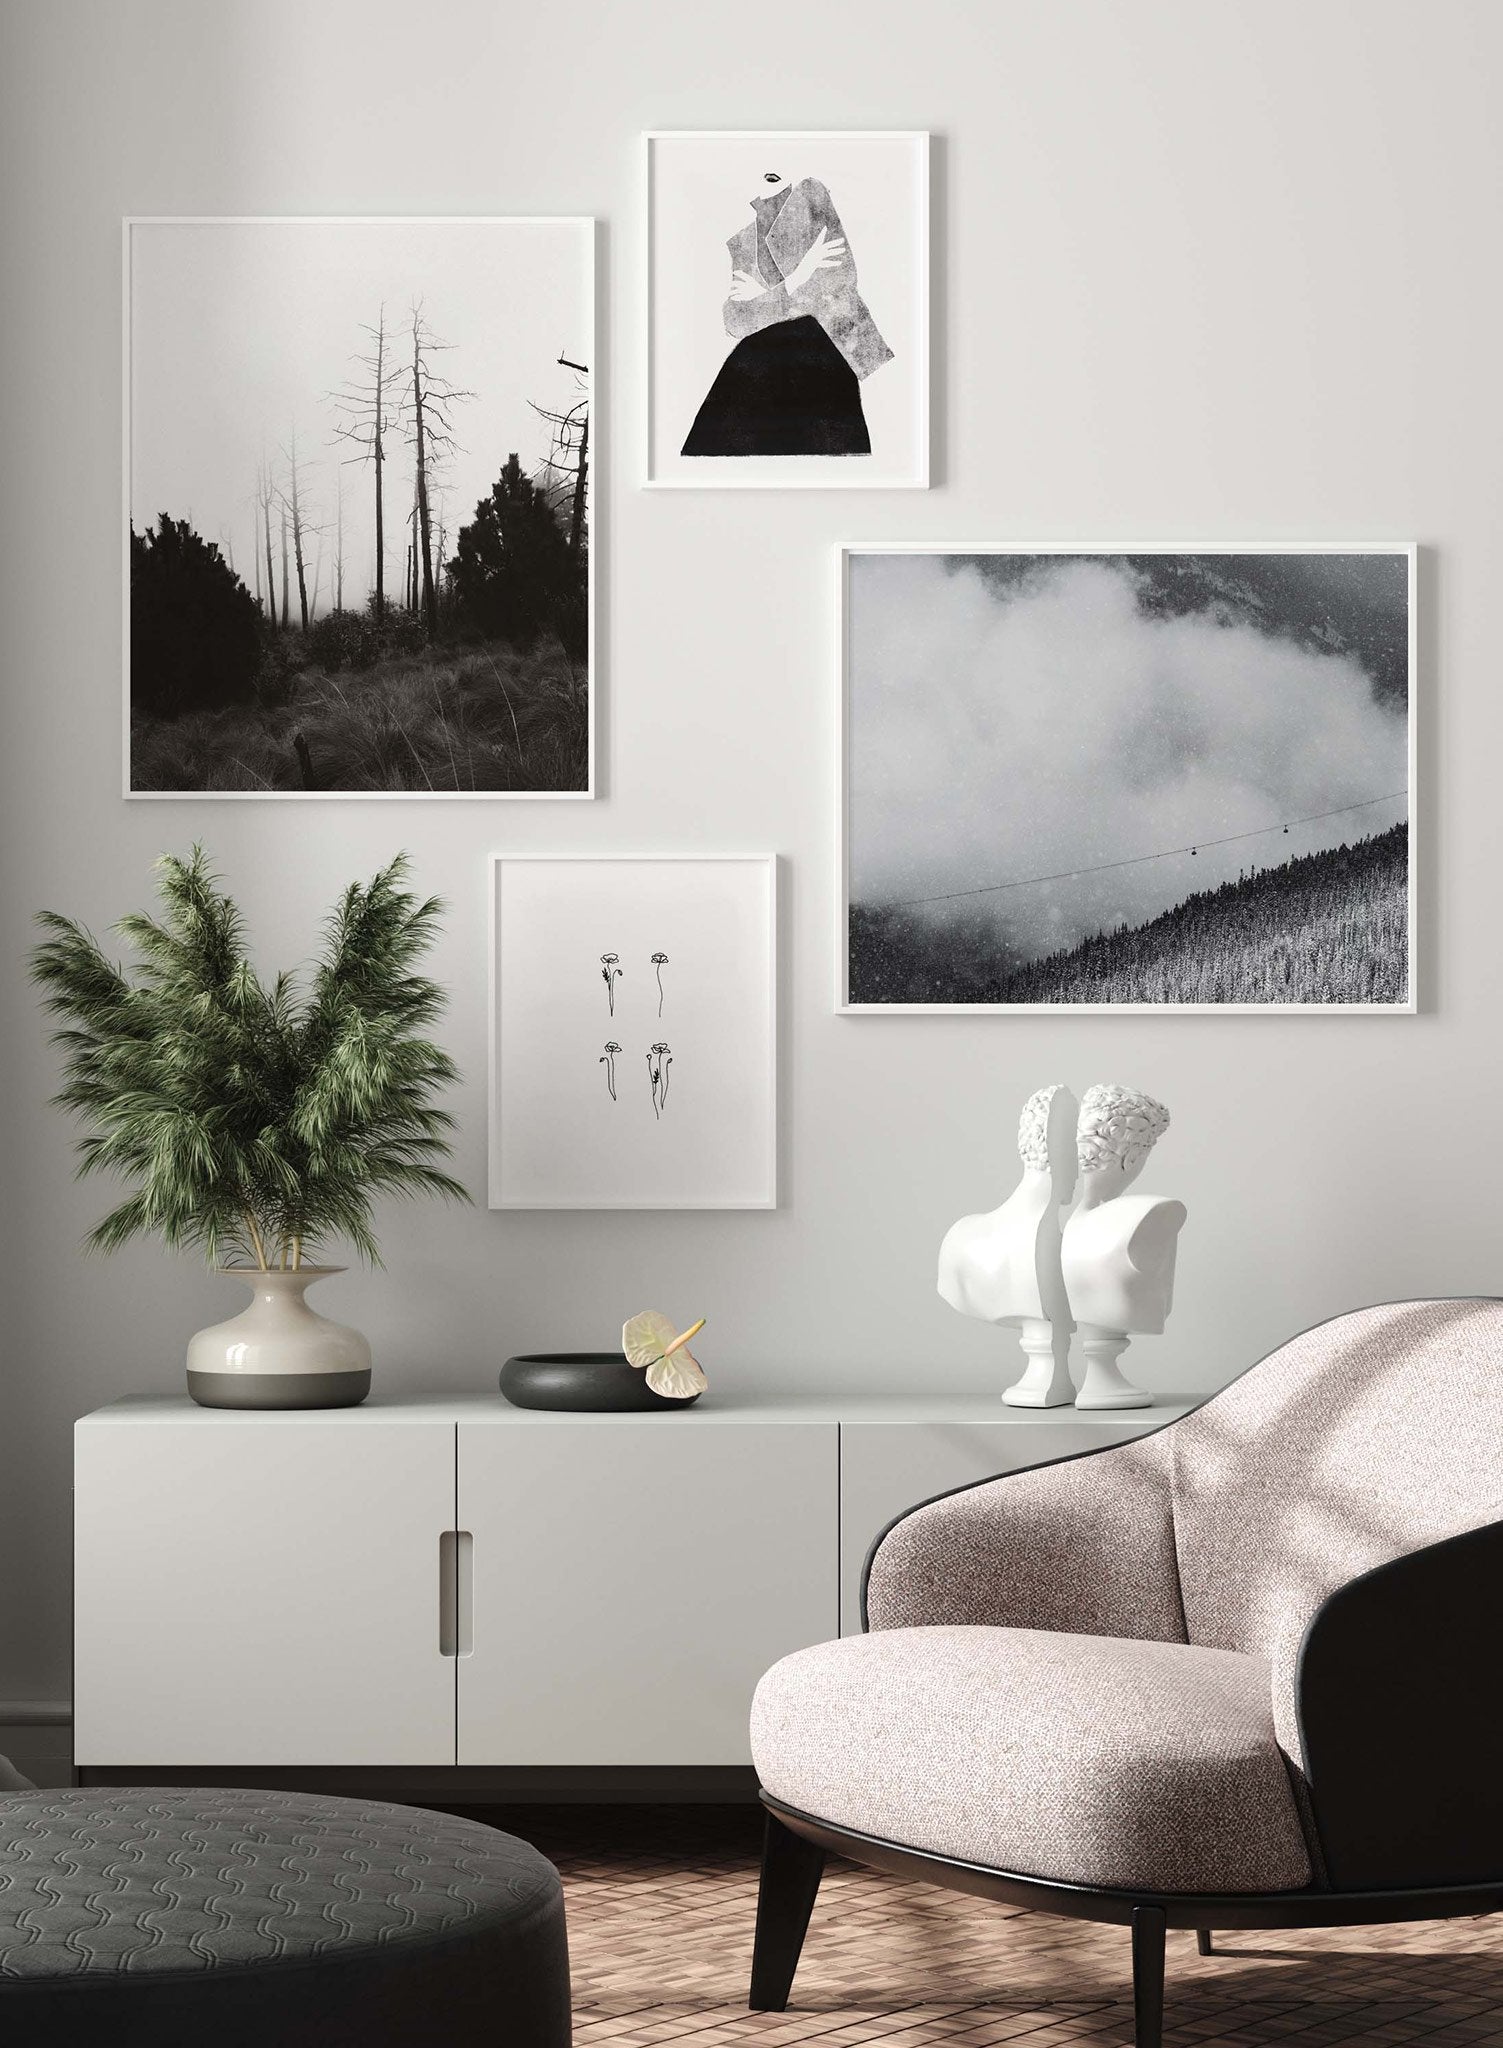 Landscape photography poster by Opposite Wall with mist on a snowy mountain - Lifestyle Gallery - Living Room